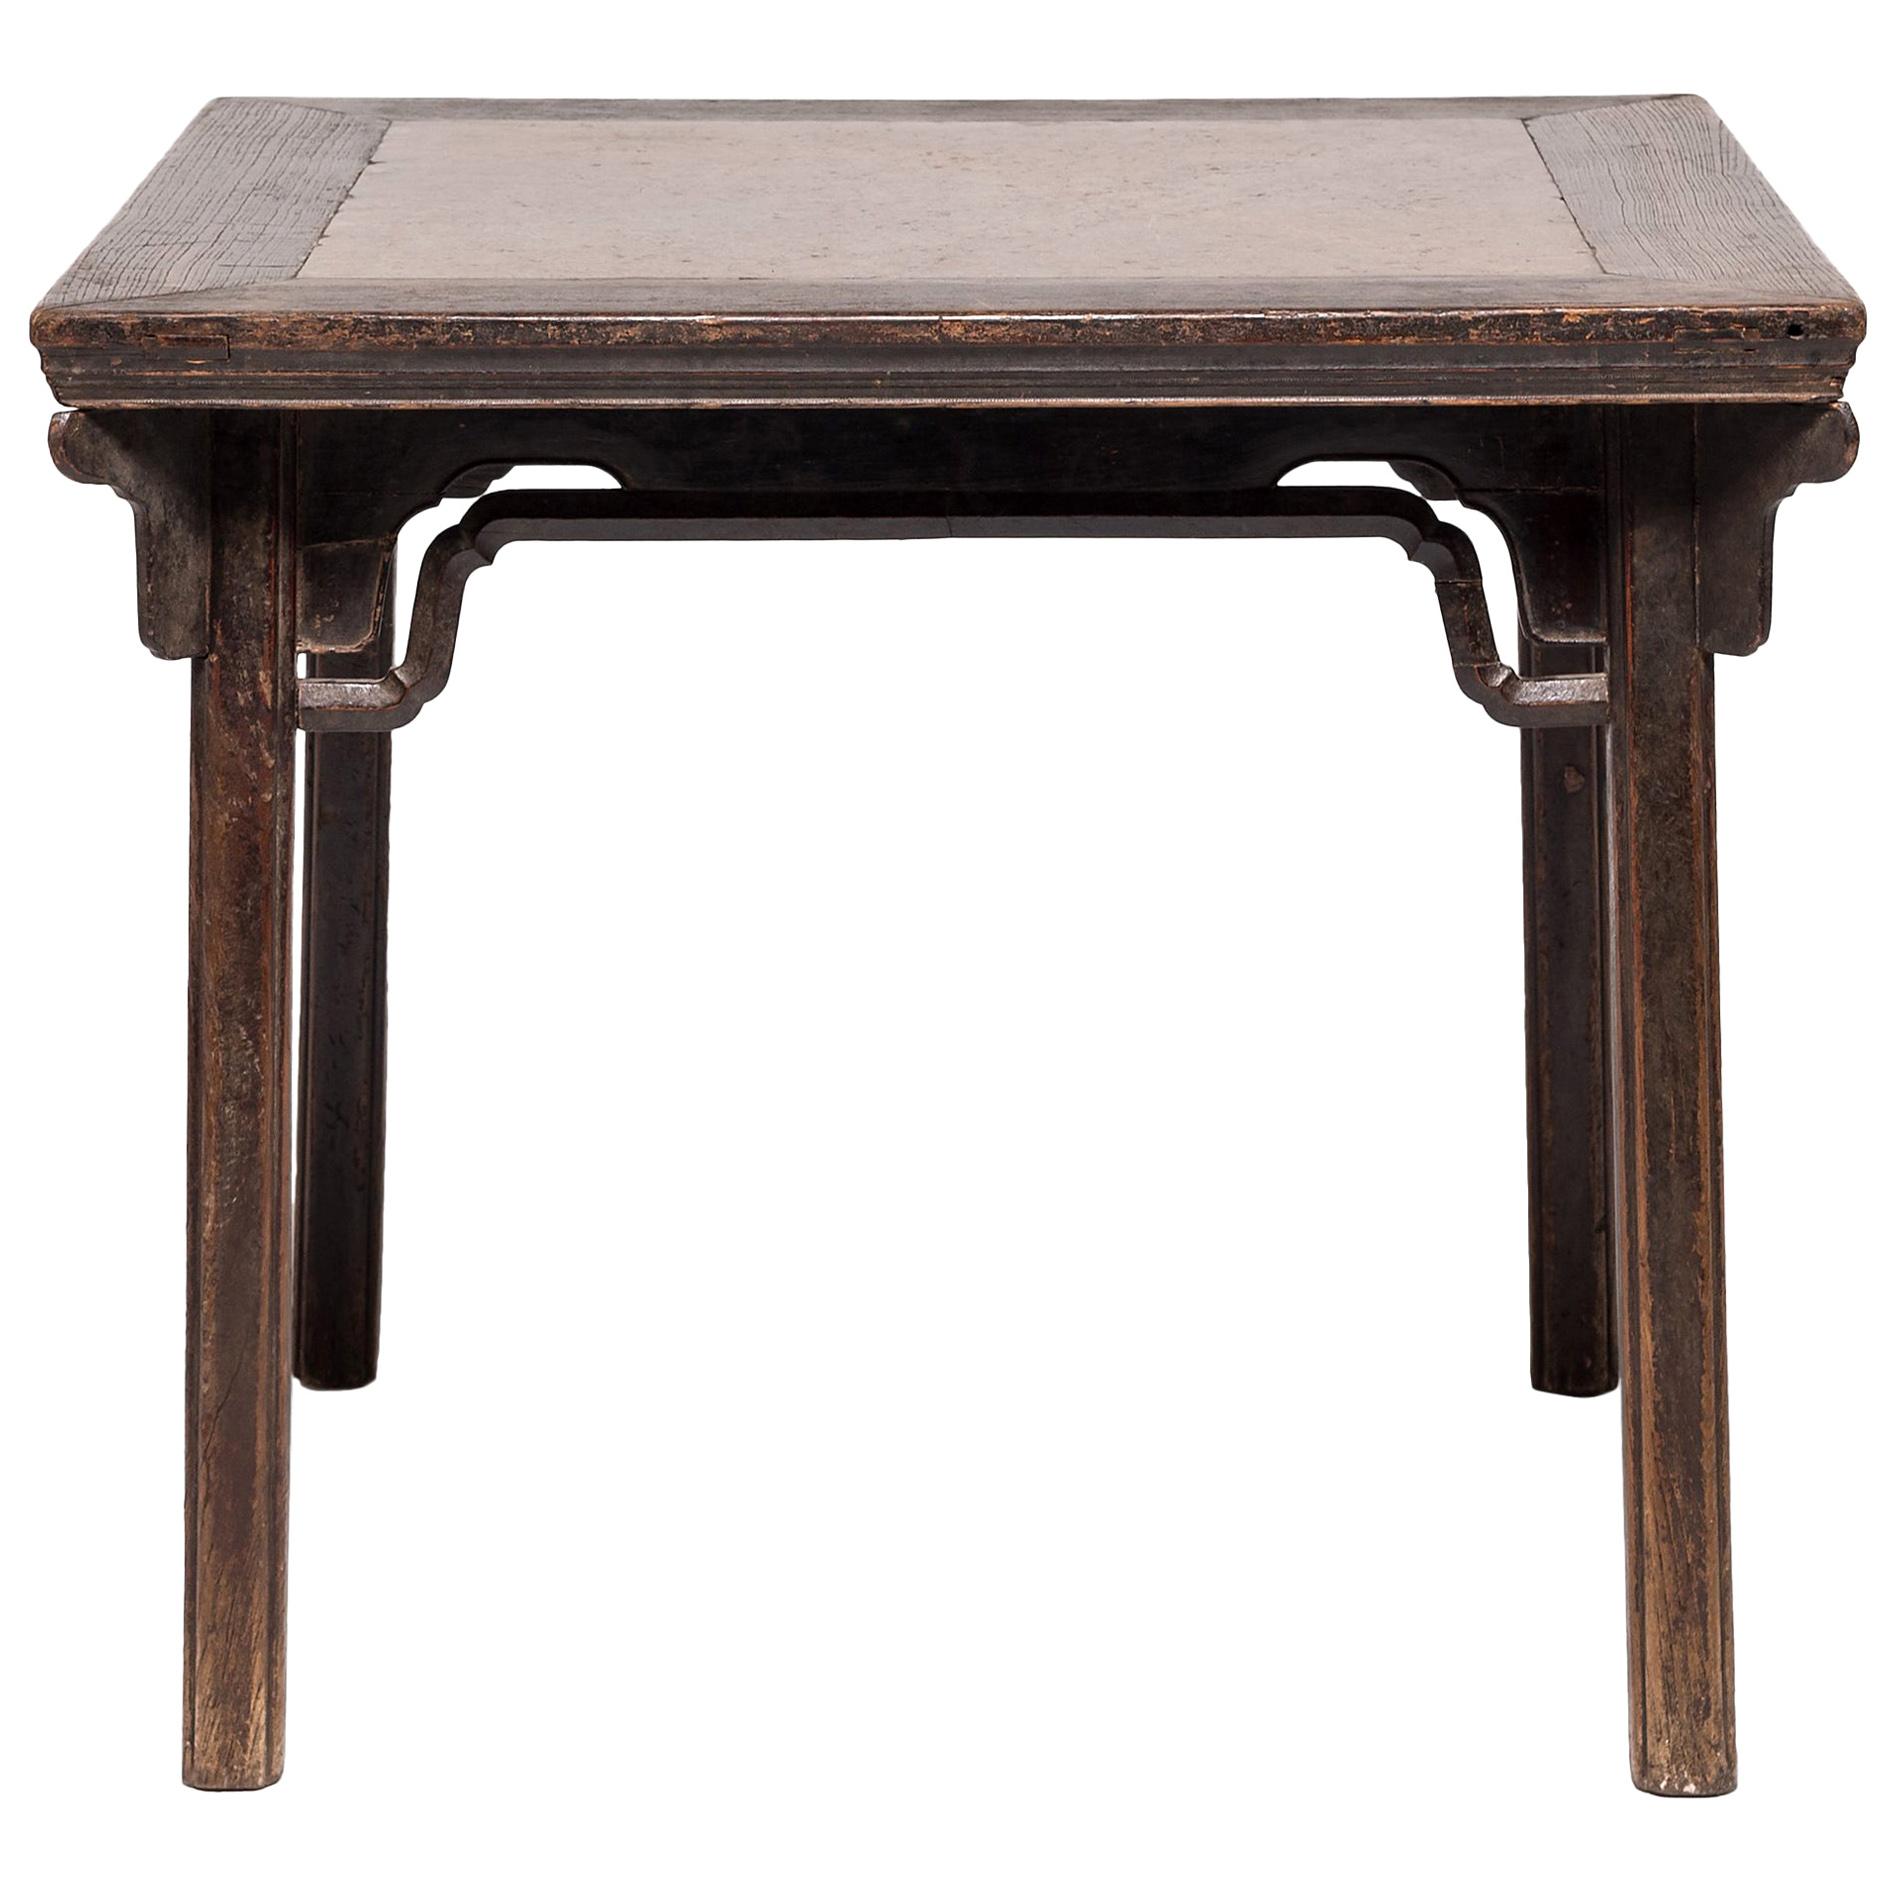 Chinese Eight Immortals Square Table with Stone Top, circa 1800 For Sale